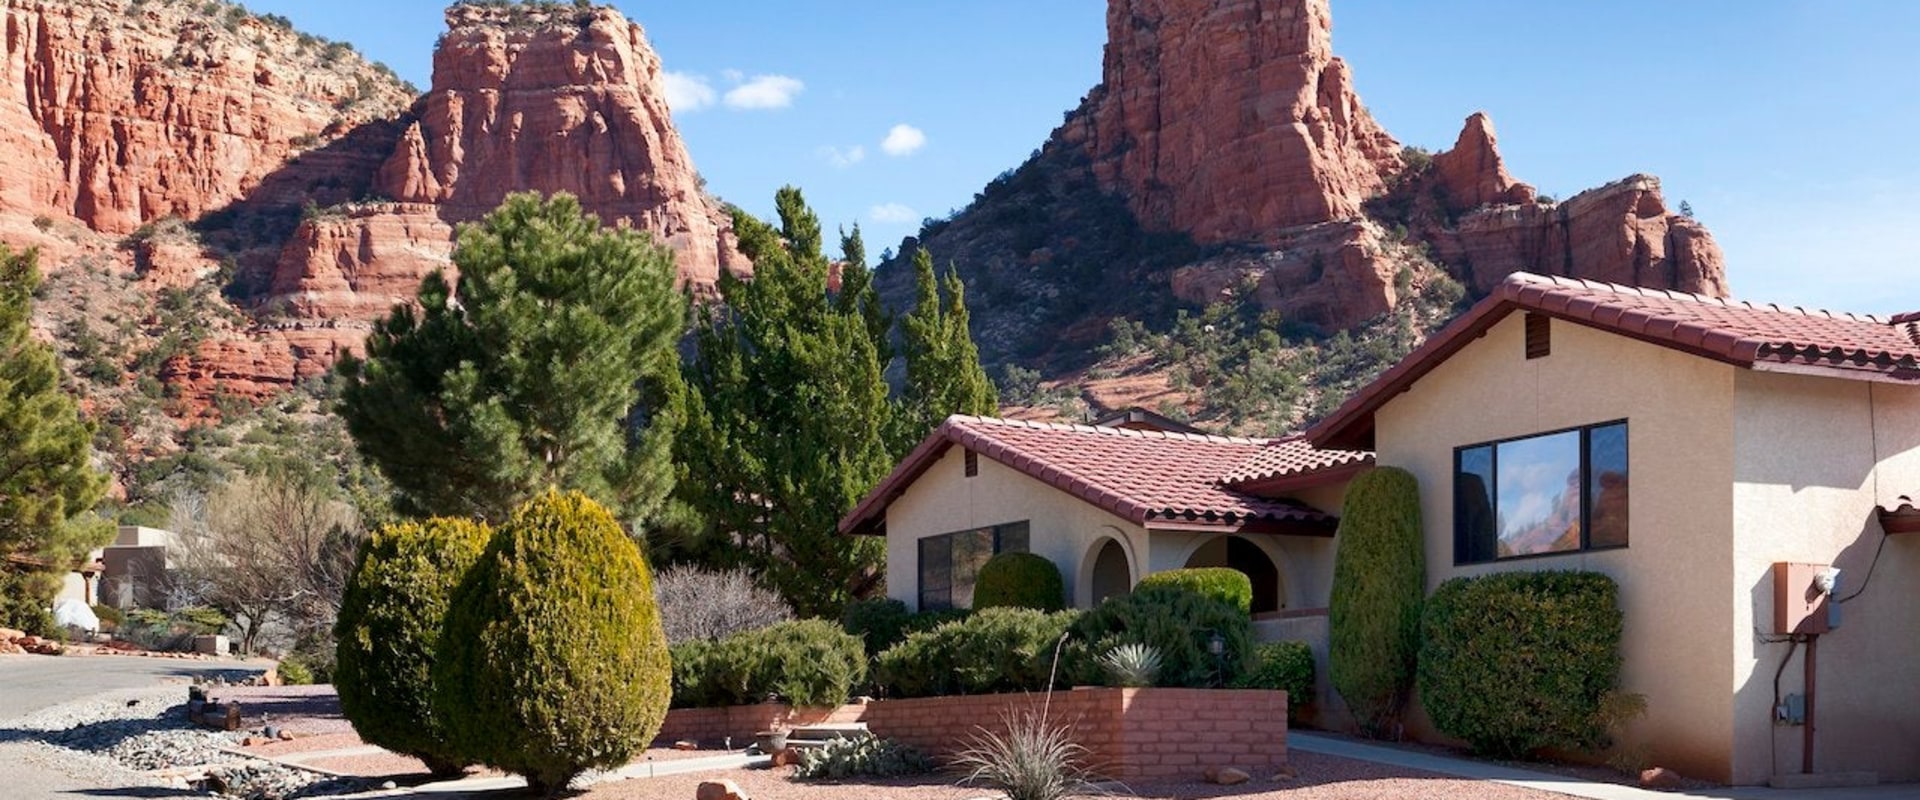 An Overview of Single Family Investment Properties in Arizona